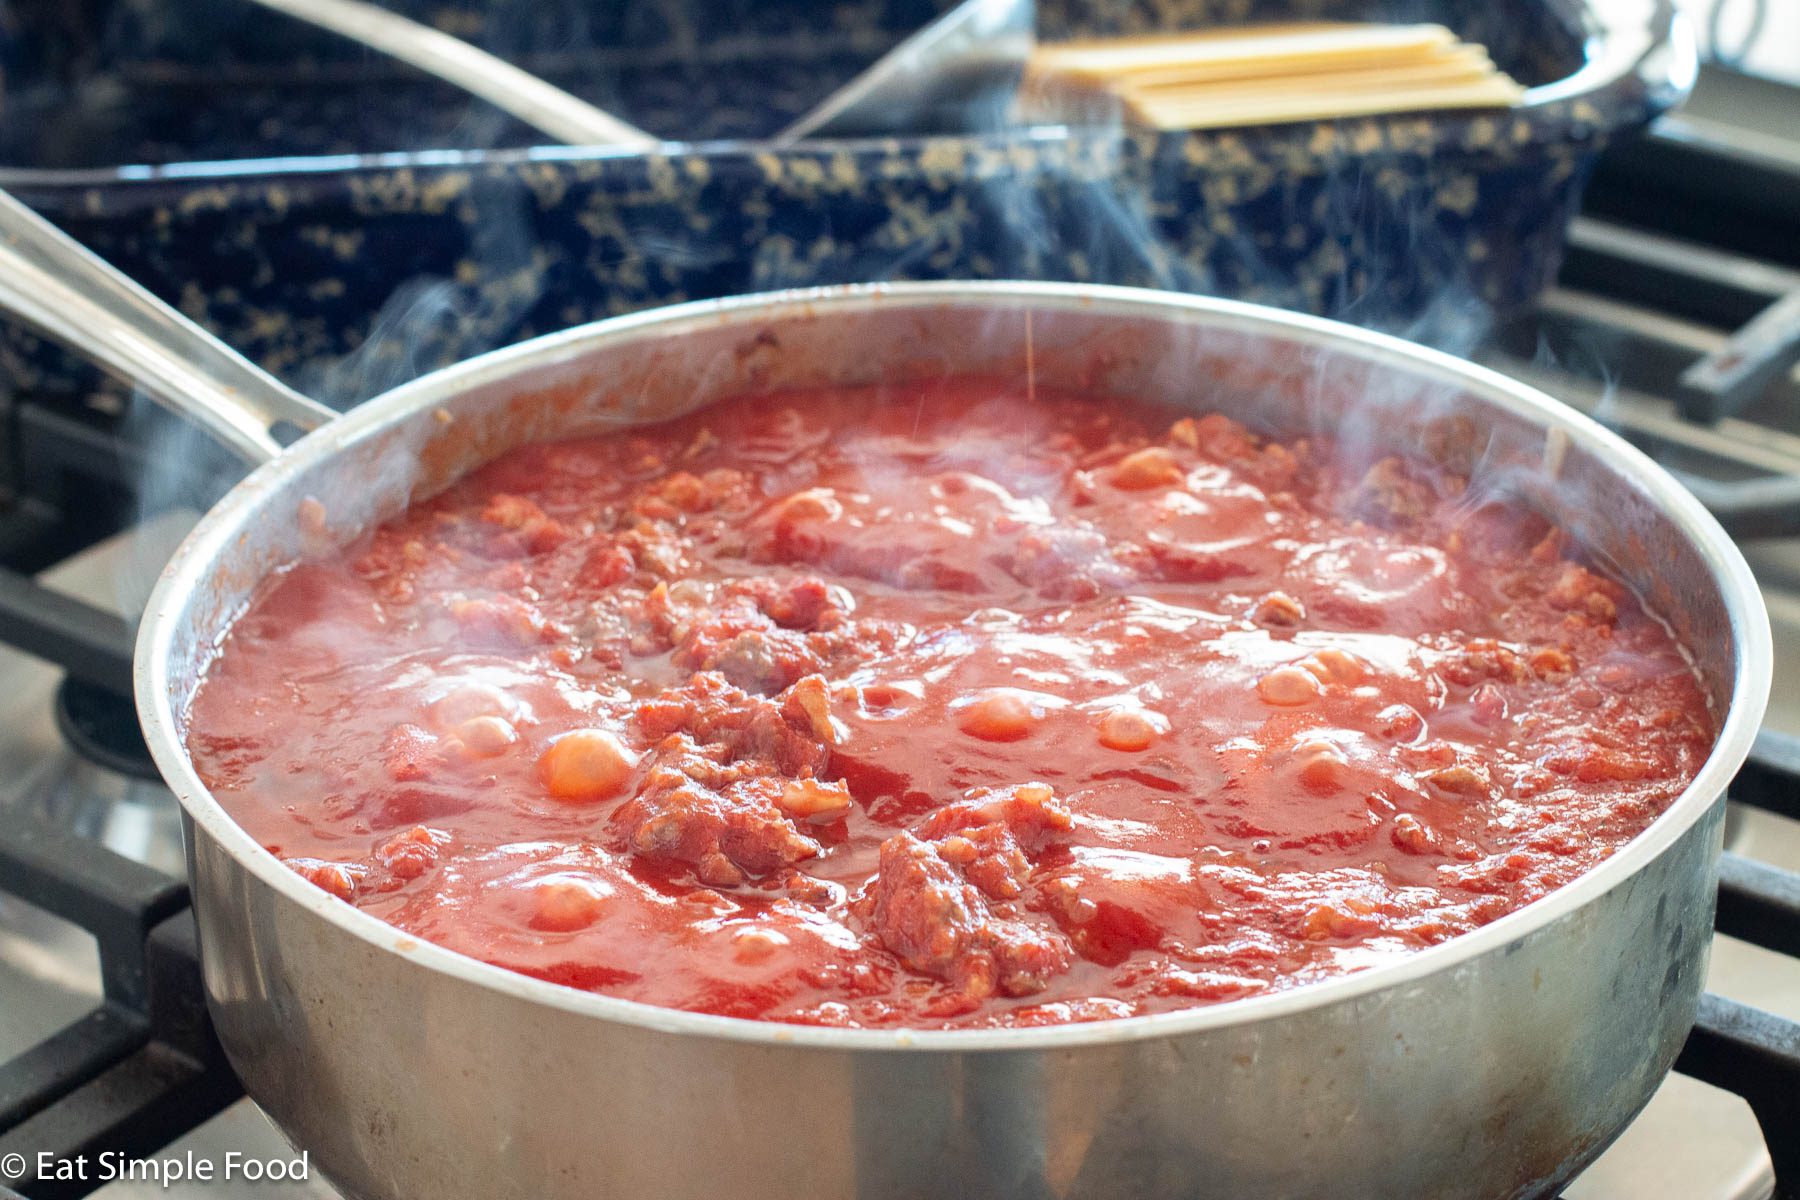 Large stainless steel pot of bubbling red marinara sauce on a stovetop with lasagna noodles in the background.